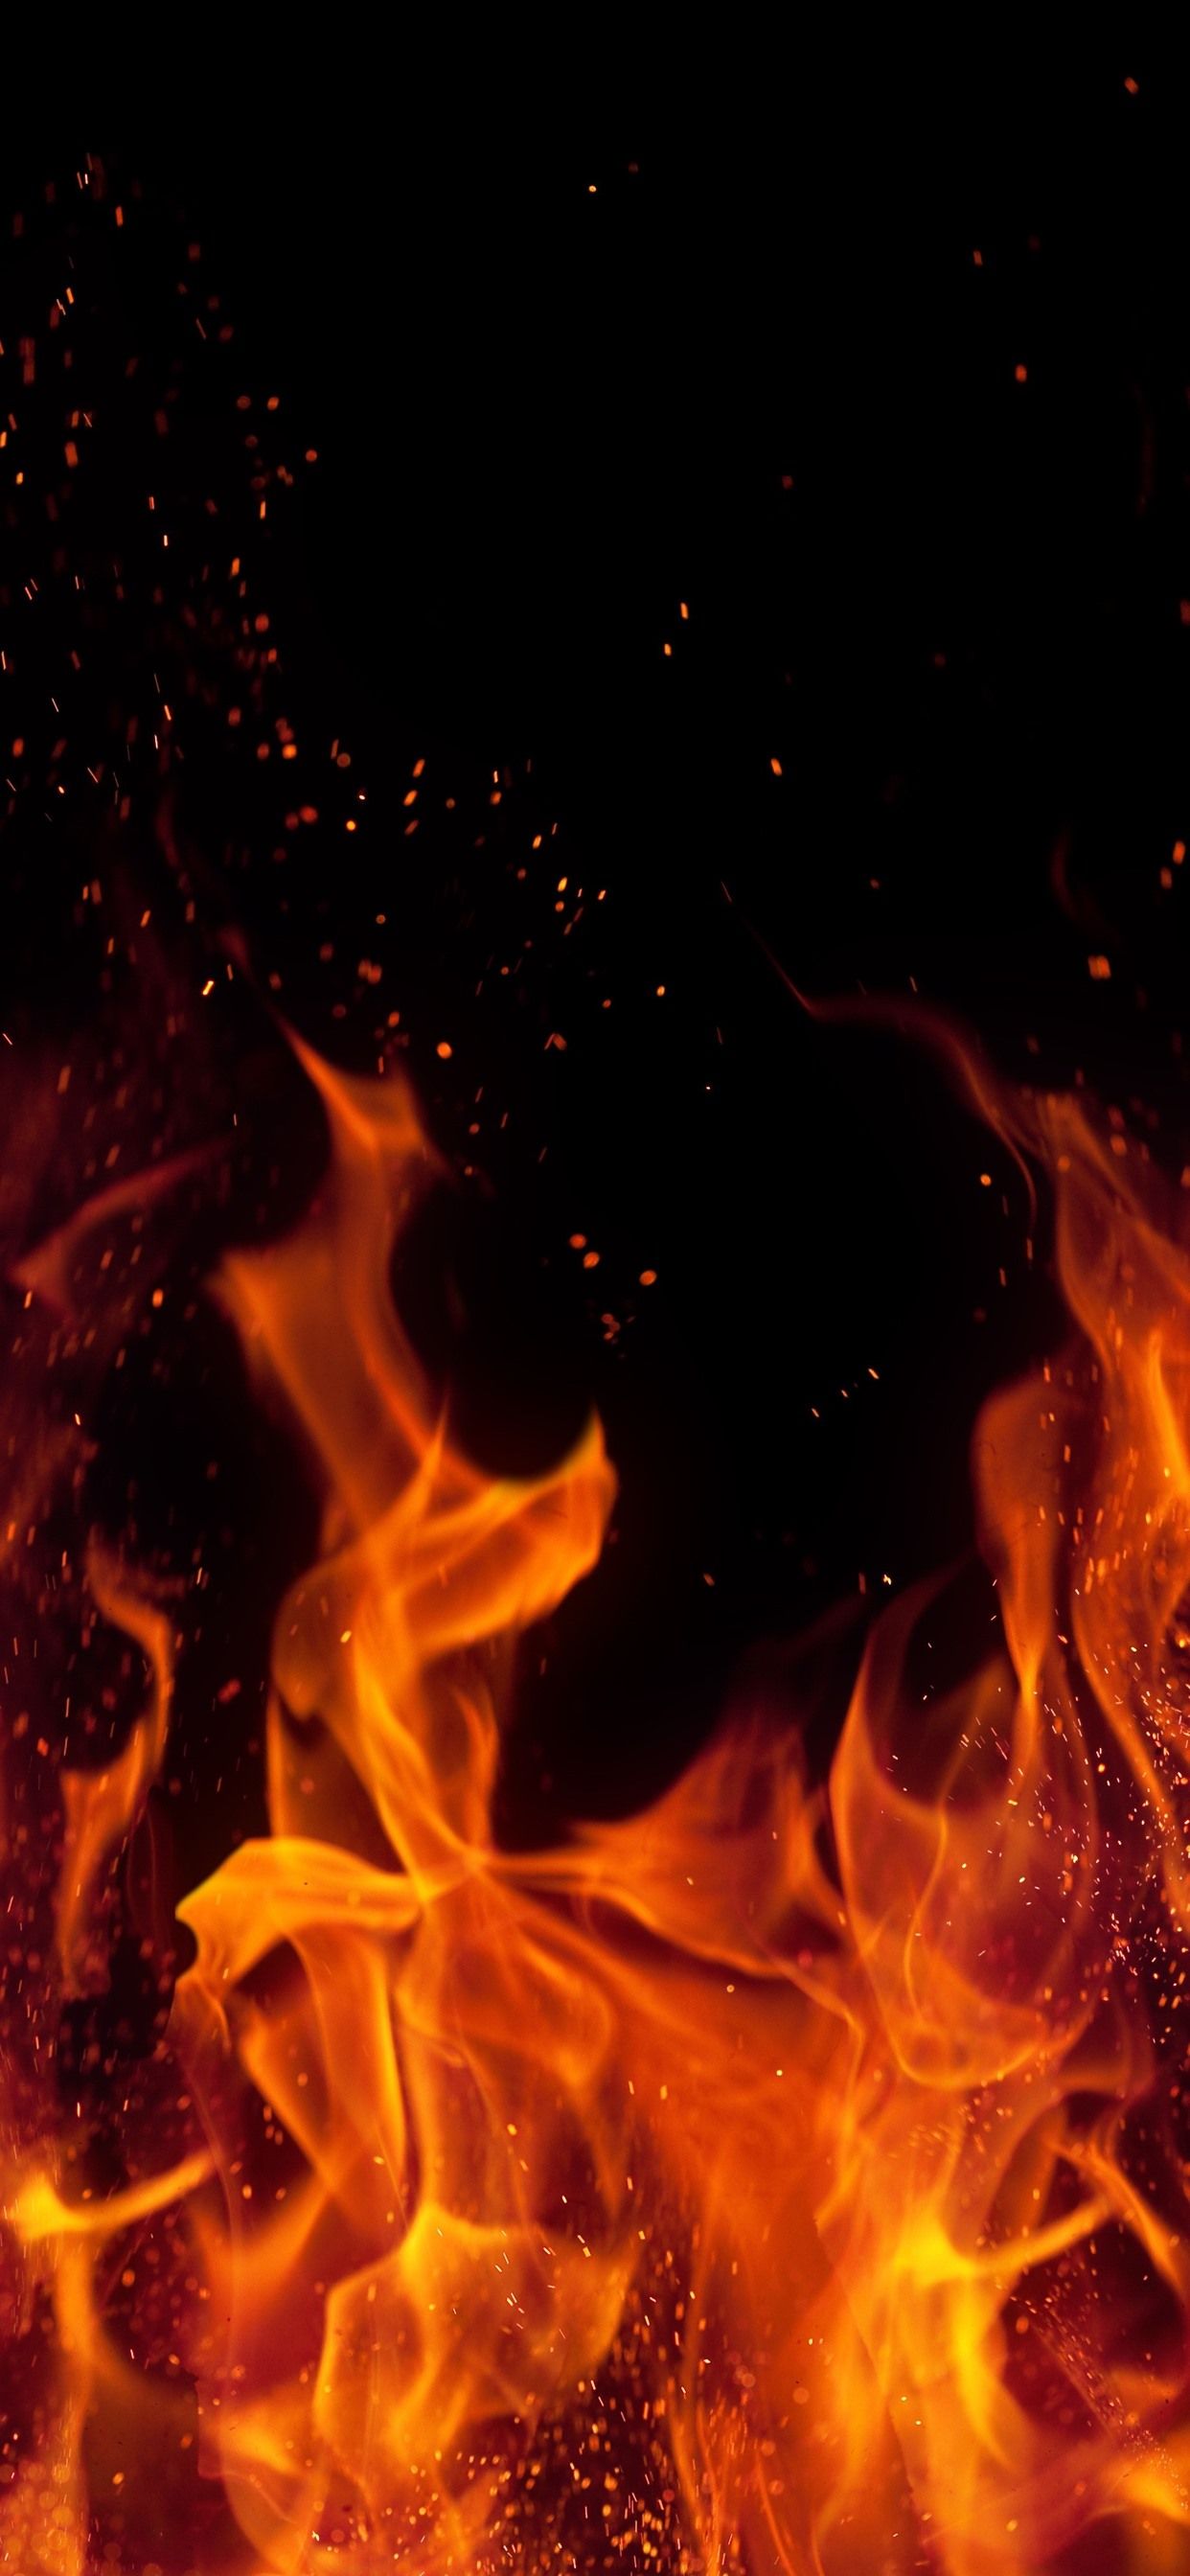 Fire, Flame, Sparks, Black Background 1242x2688 IPhone 11 Pro XS Max Wallpaper, Background, Picture, Image